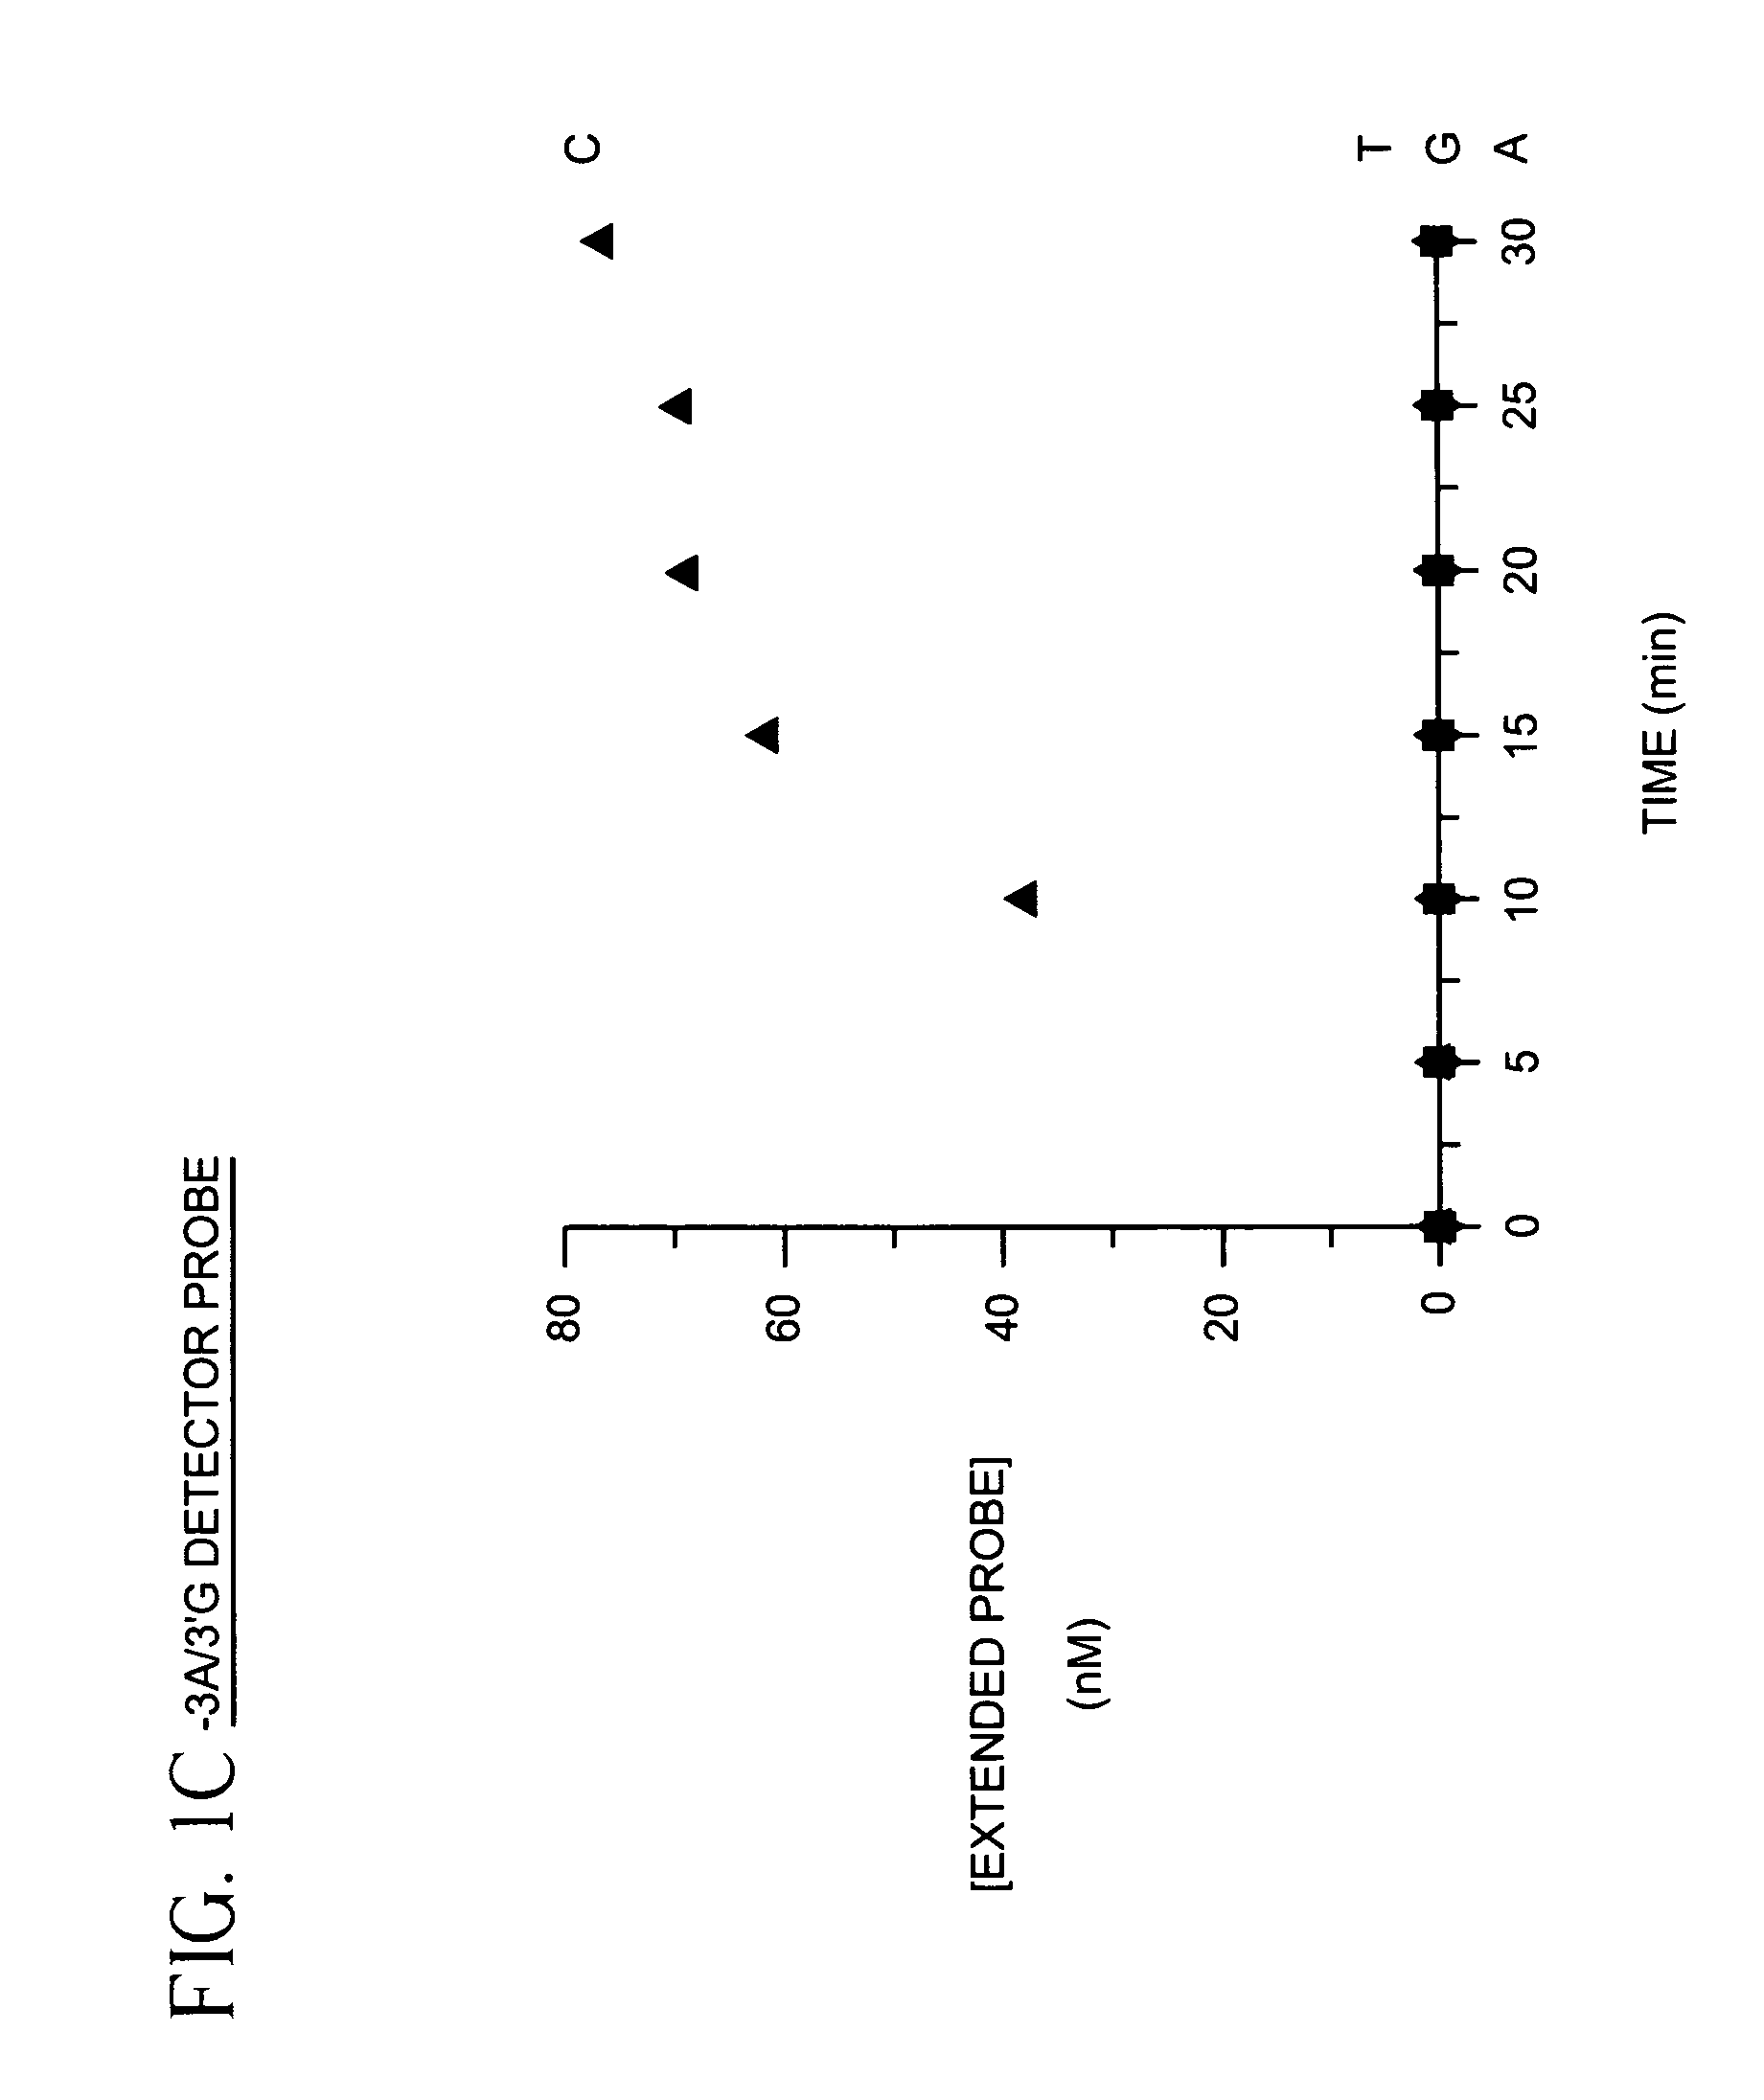 Methods for detecting single nucleotide polymorphisms